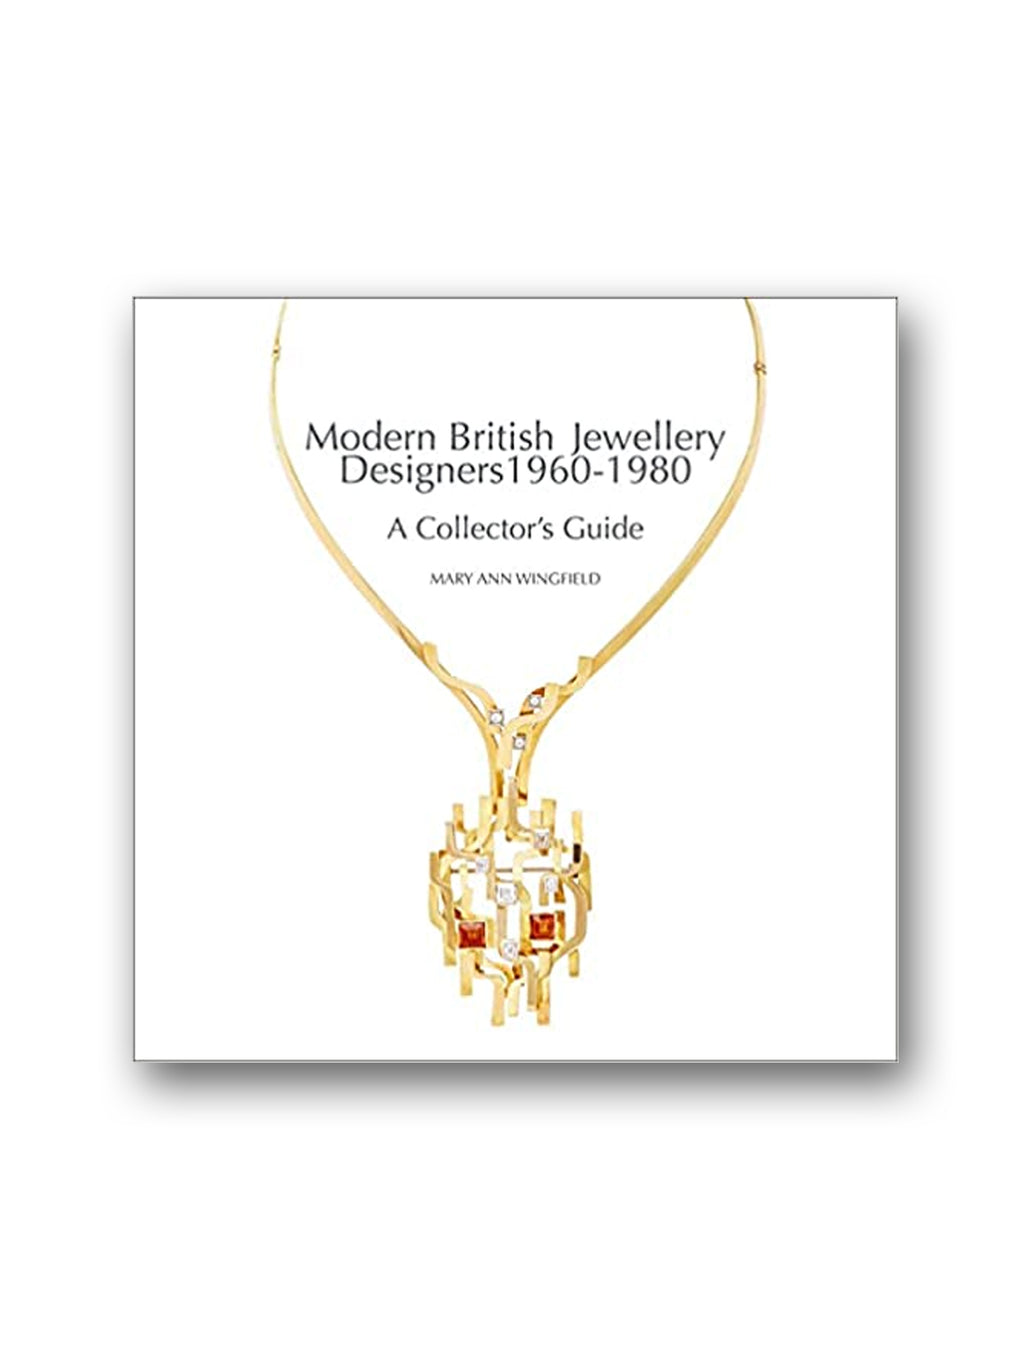 Modern British Jewellery Designers 1960-1980 : A Collector's Guide